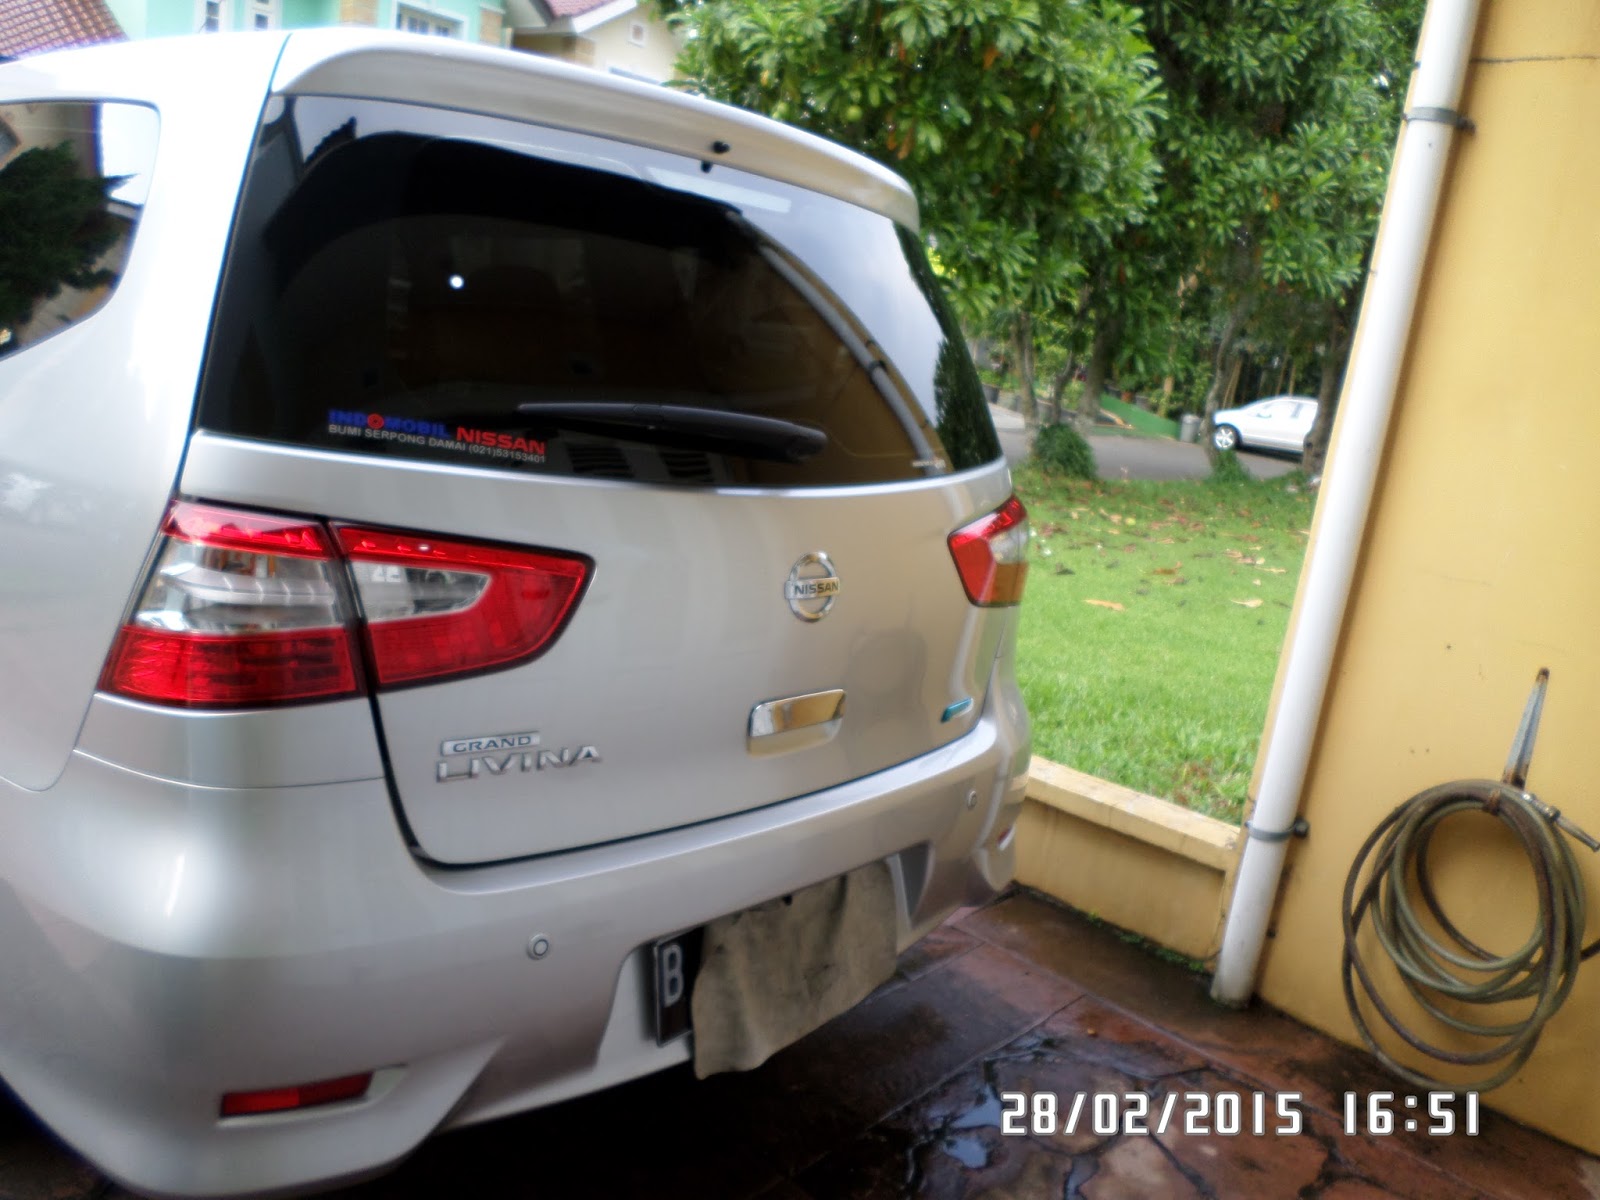 Halo: review all new nissan grand livina SV manual 2014